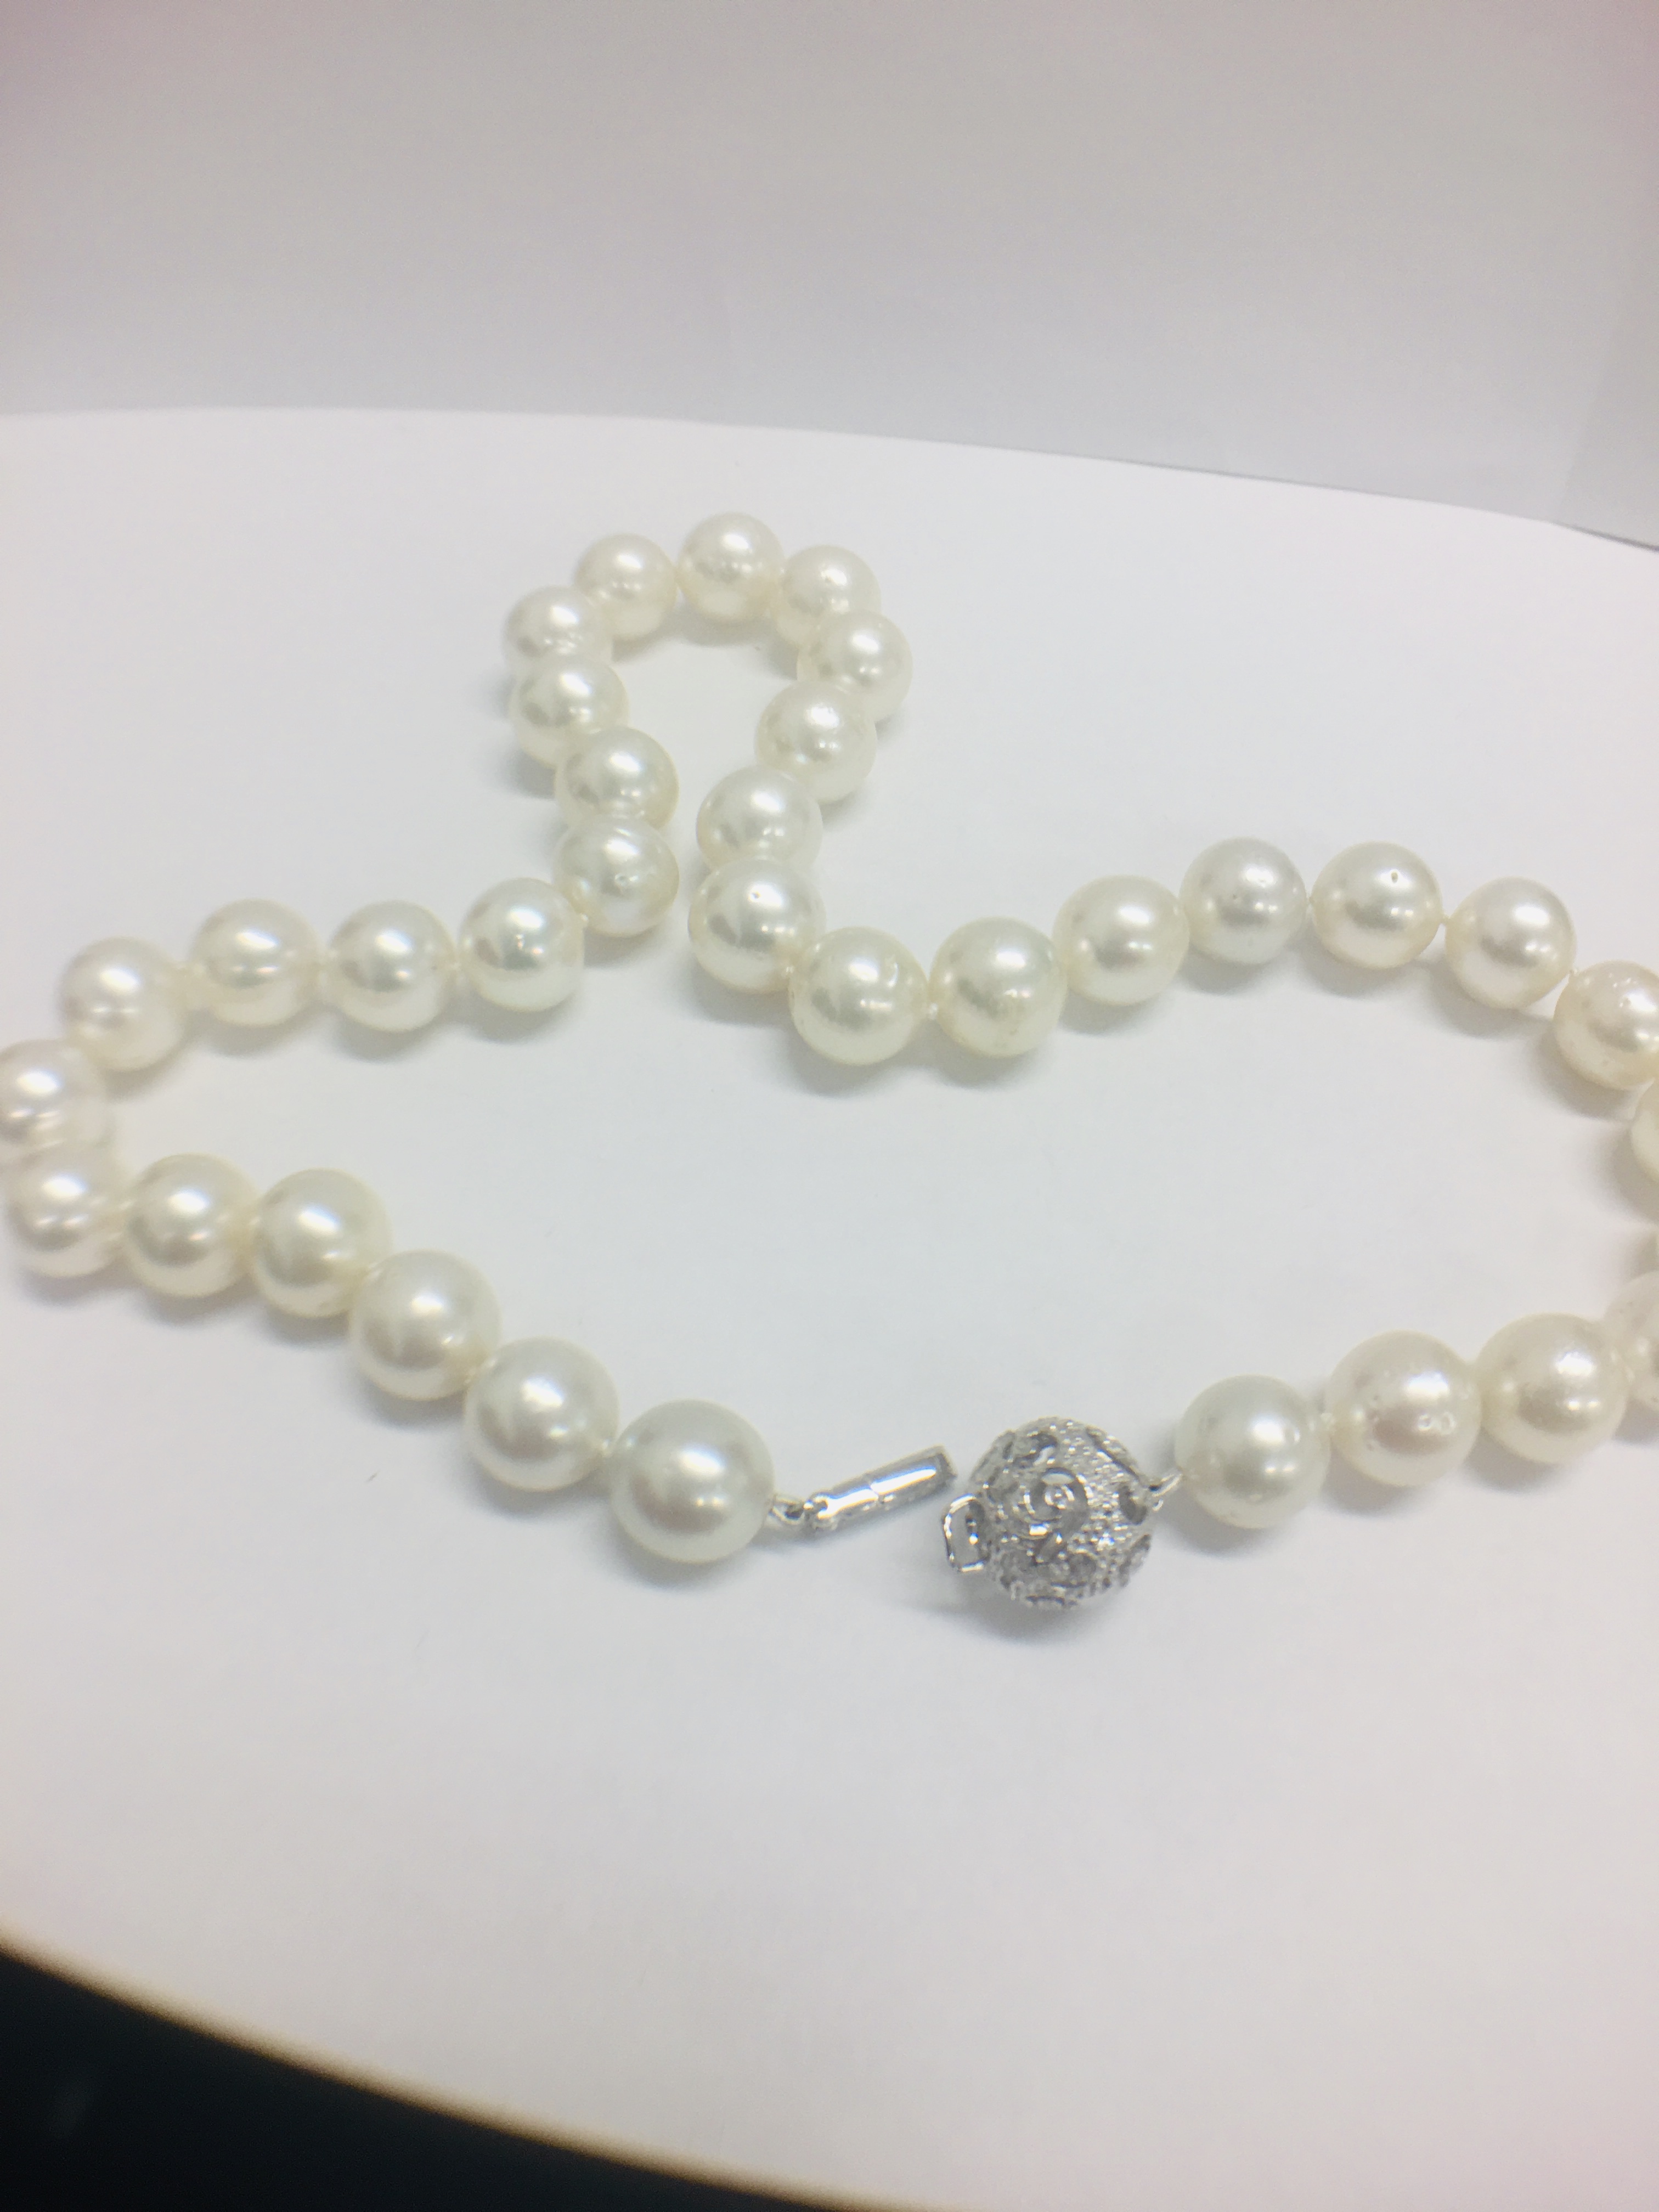 Strand 35 South Sea Pearls With 14Ct White Gold Filagree Style Ball Clasp. - Image 2 of 10